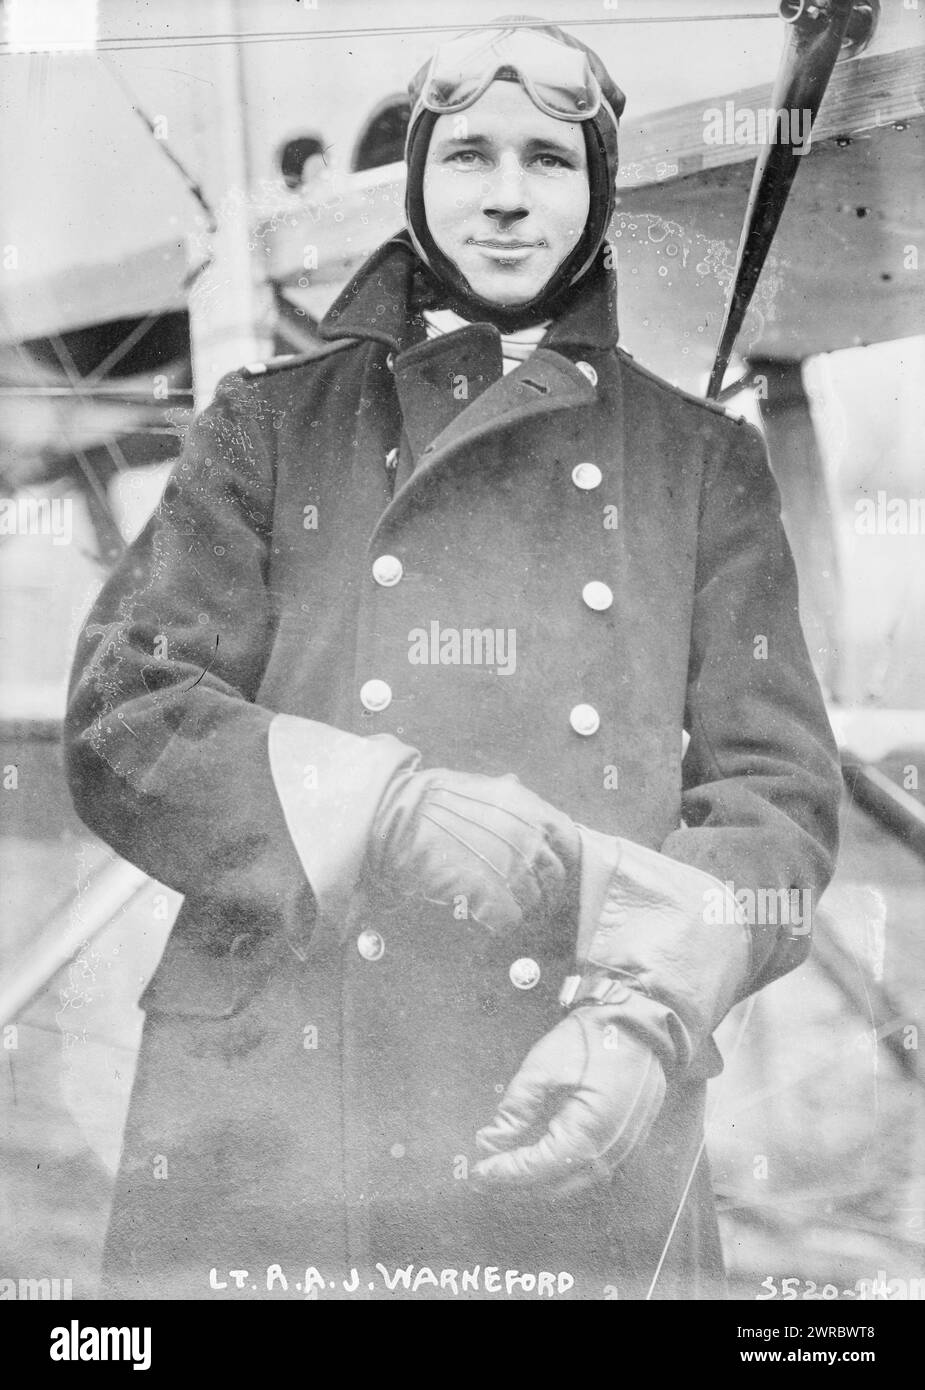 Lt. R.A.J. Warneford, Photograph shows Reginald Alexander John Warneford (1891-1915) woh was a Royal Naval Air Service officer who served during World War I and is known for downing the German airship LZ37., between ca. 1910 and ca. 1915, Glass negatives, 1 negative: glass Stock Photo